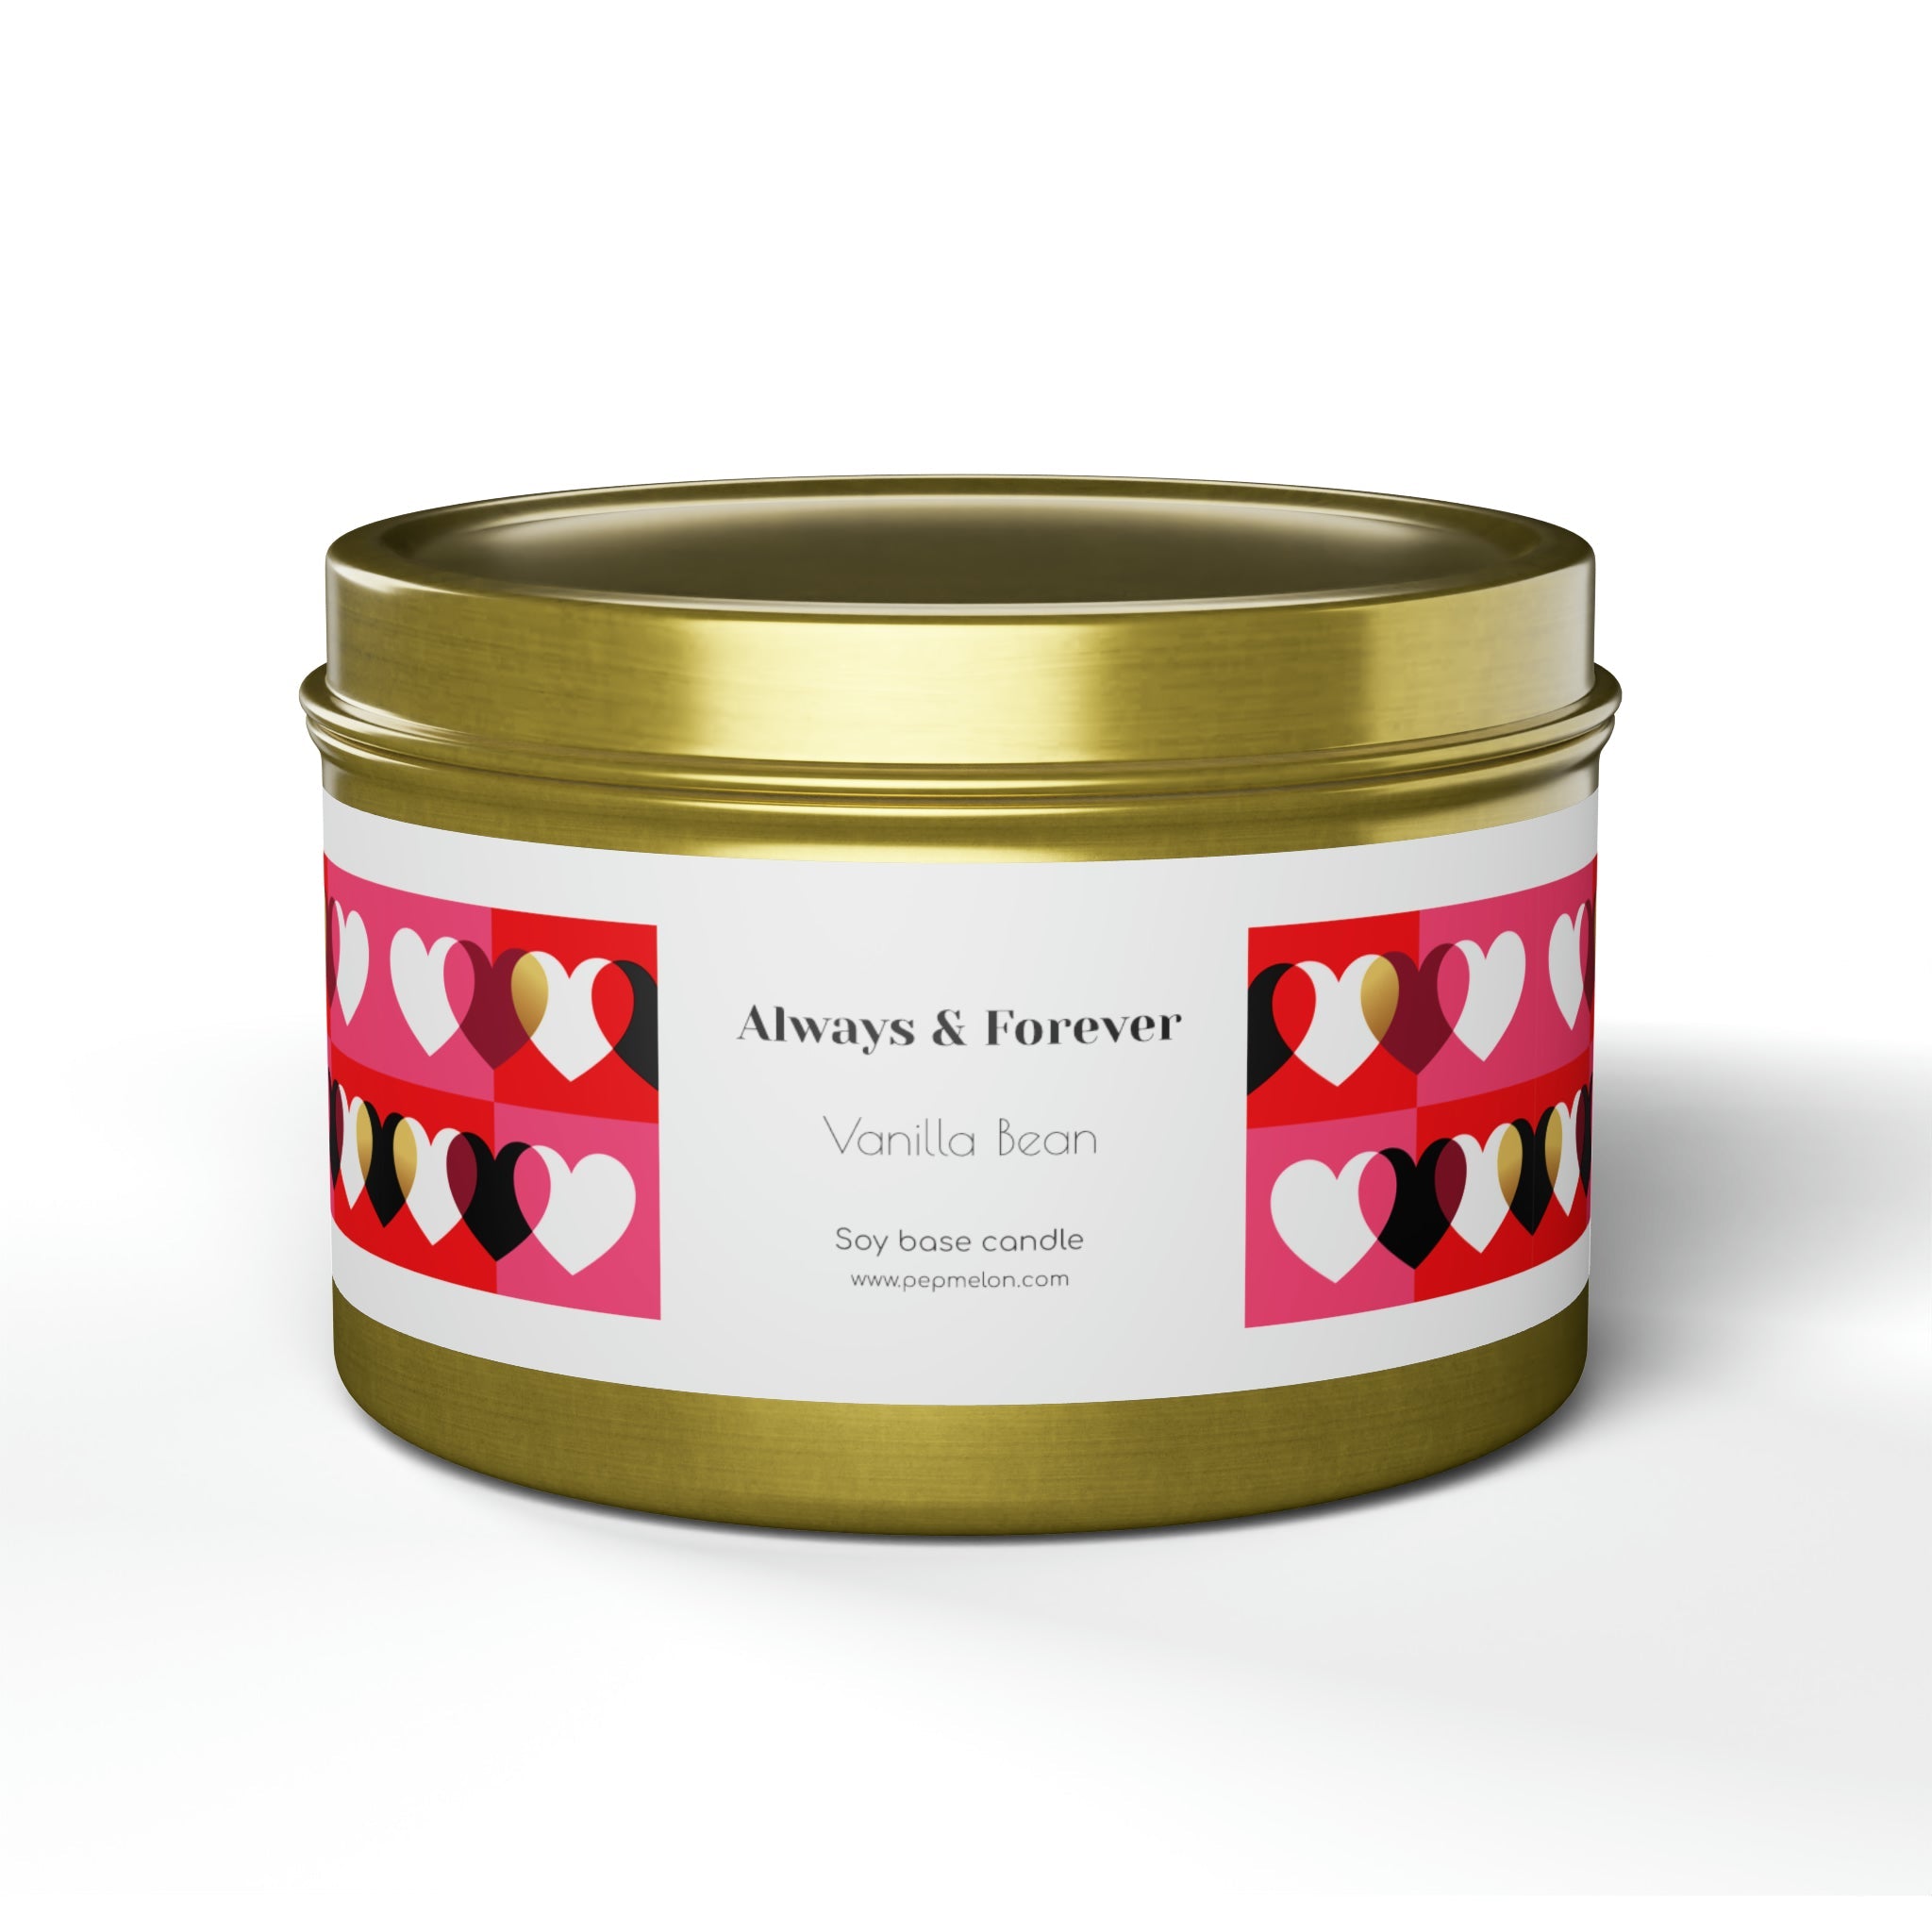 Vanilla Bean Always & Forever Soy base candle love, valentine's day gift Tin Candles-15